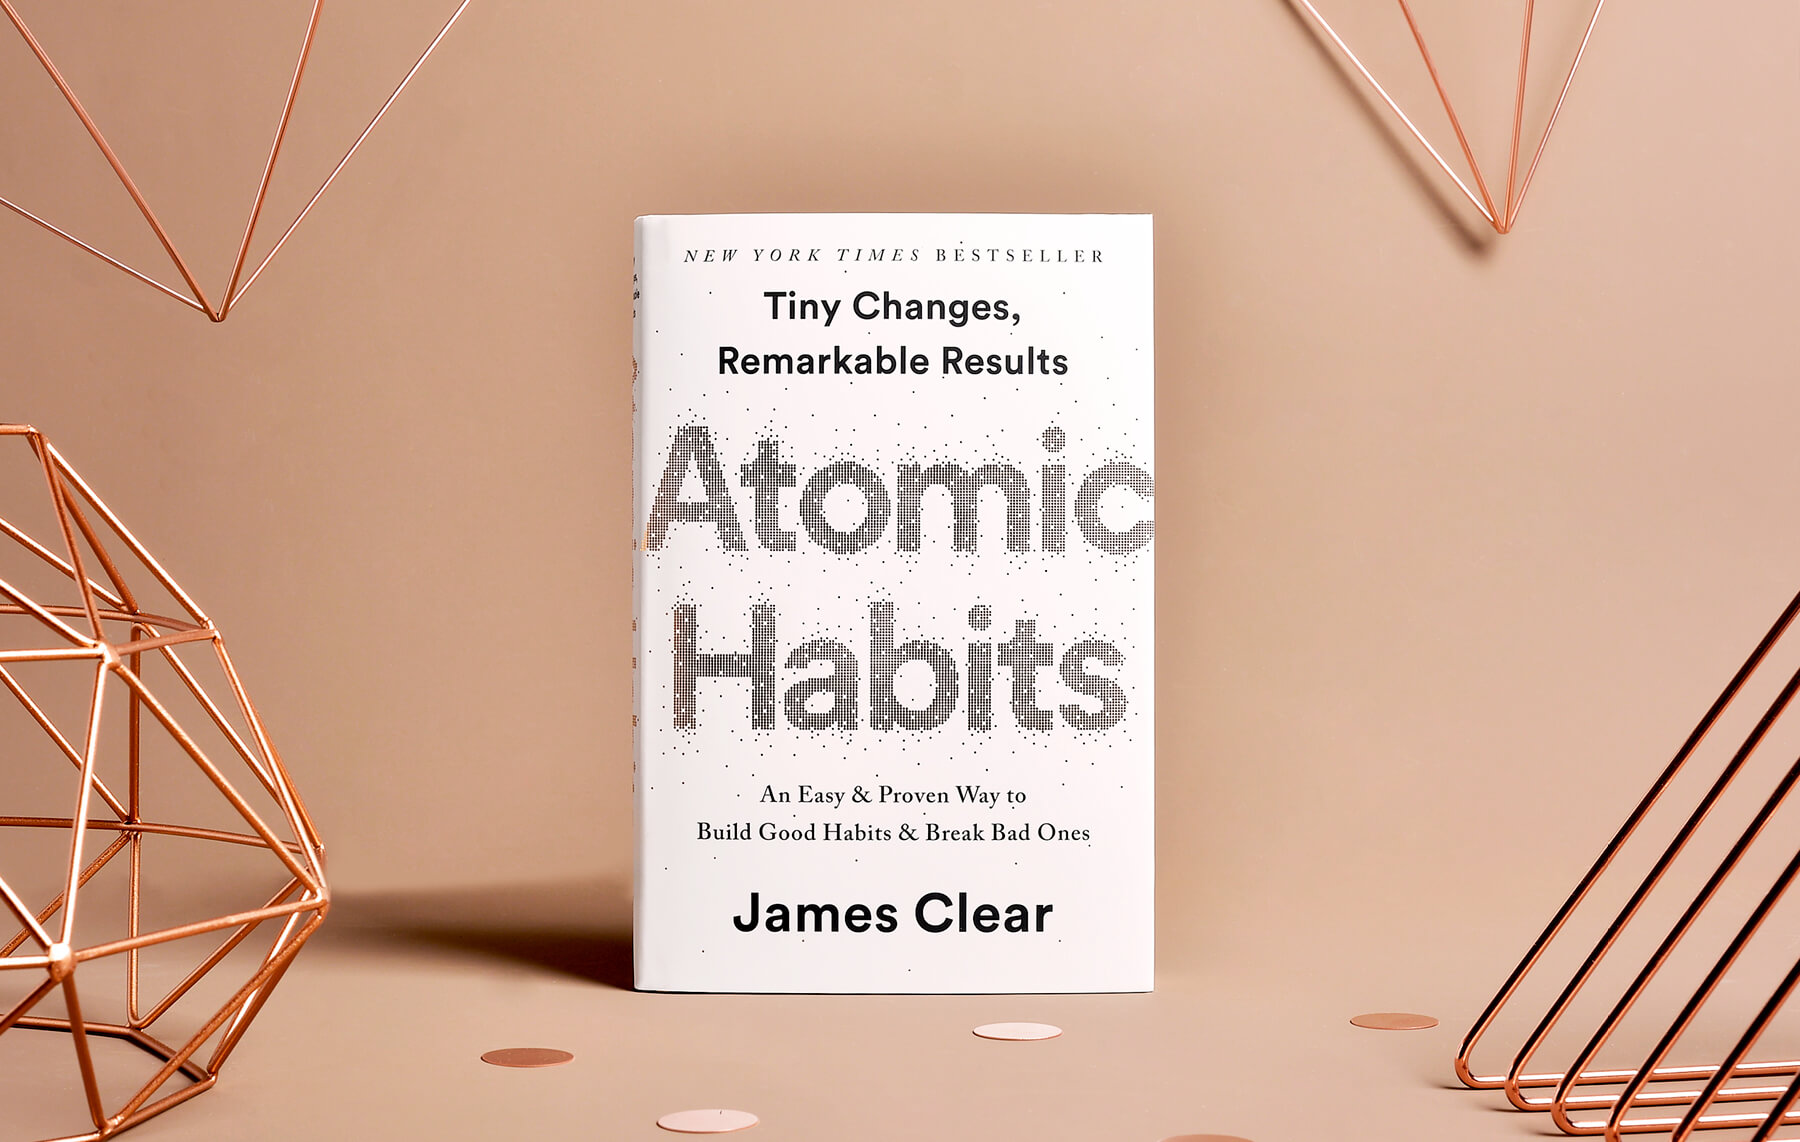 book review atomic habits by james clear